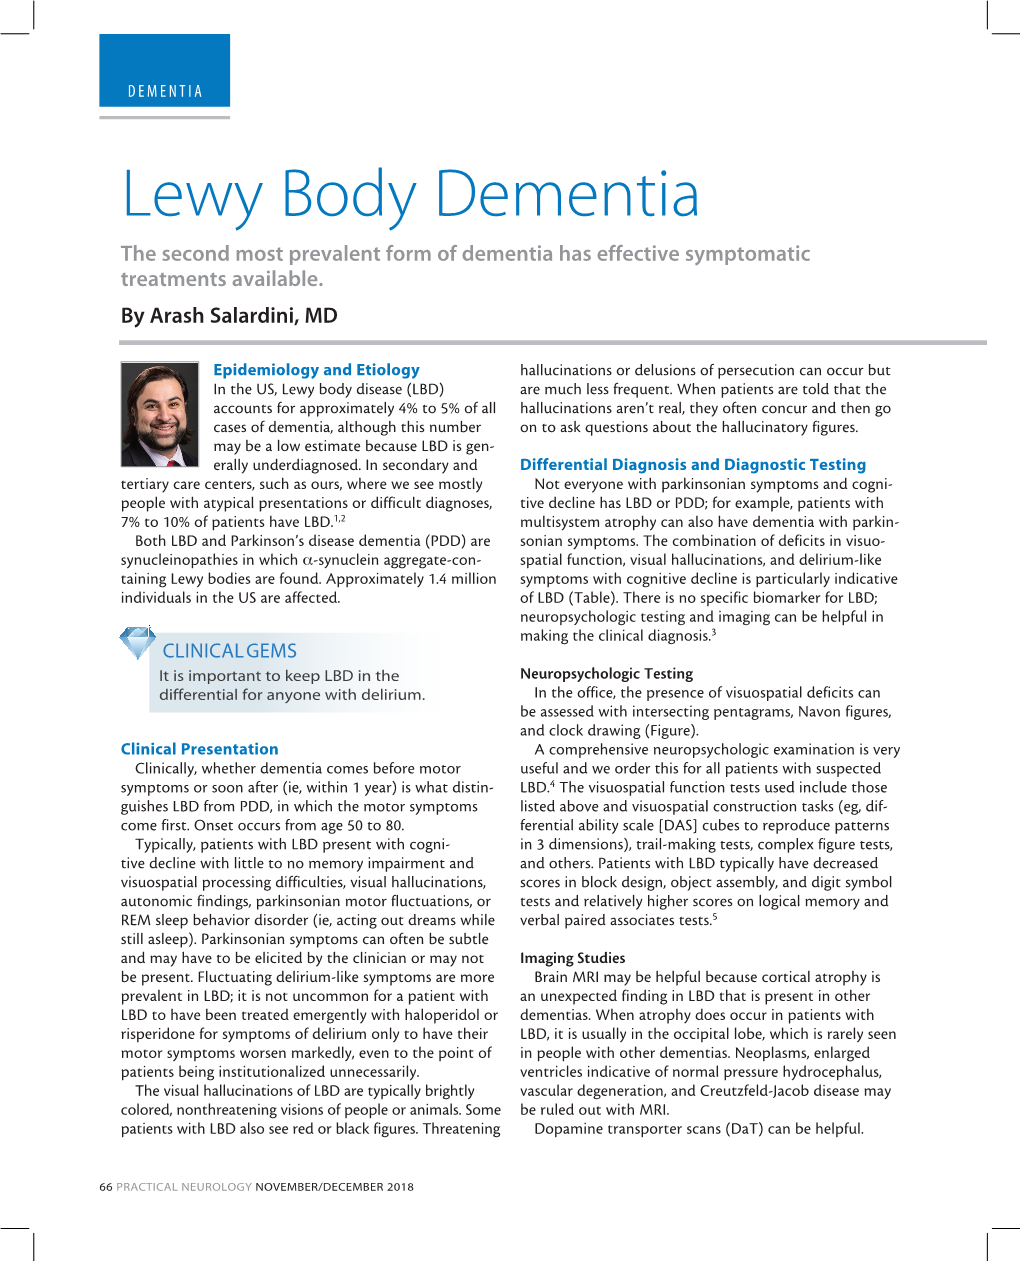 Lewy Body Dementia the Second Most Prevalent Form of Dementia Has Effective Symptomatic Treatments Available